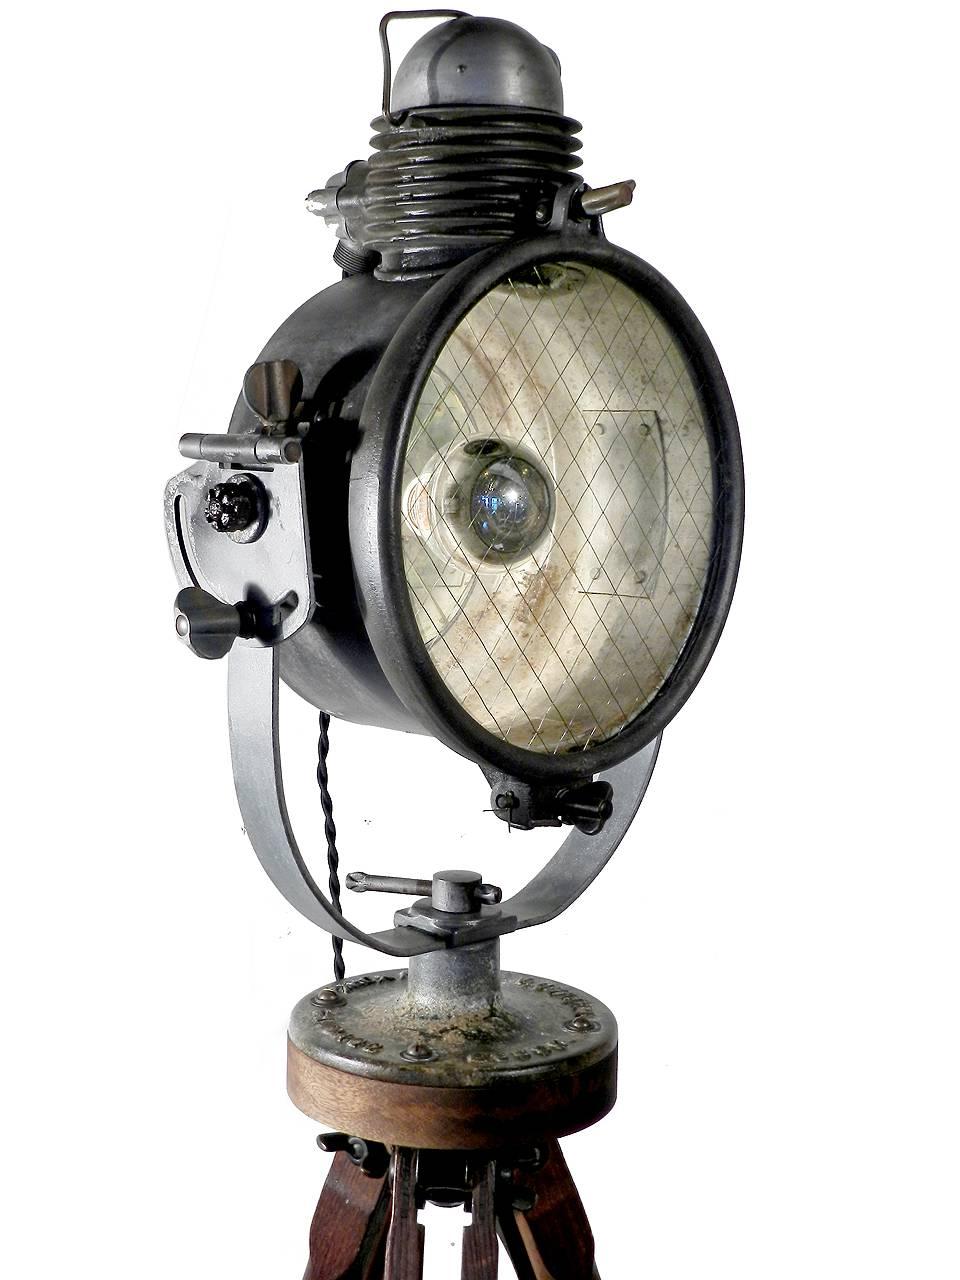 This is a very early flood light that has been rewired for home use and standard bulbs. It has a wonderful Industrial look with a wire glass lens, mirrored reflector, adjustable wood tripod and black twisted fabric covered wire. The iron fixture has